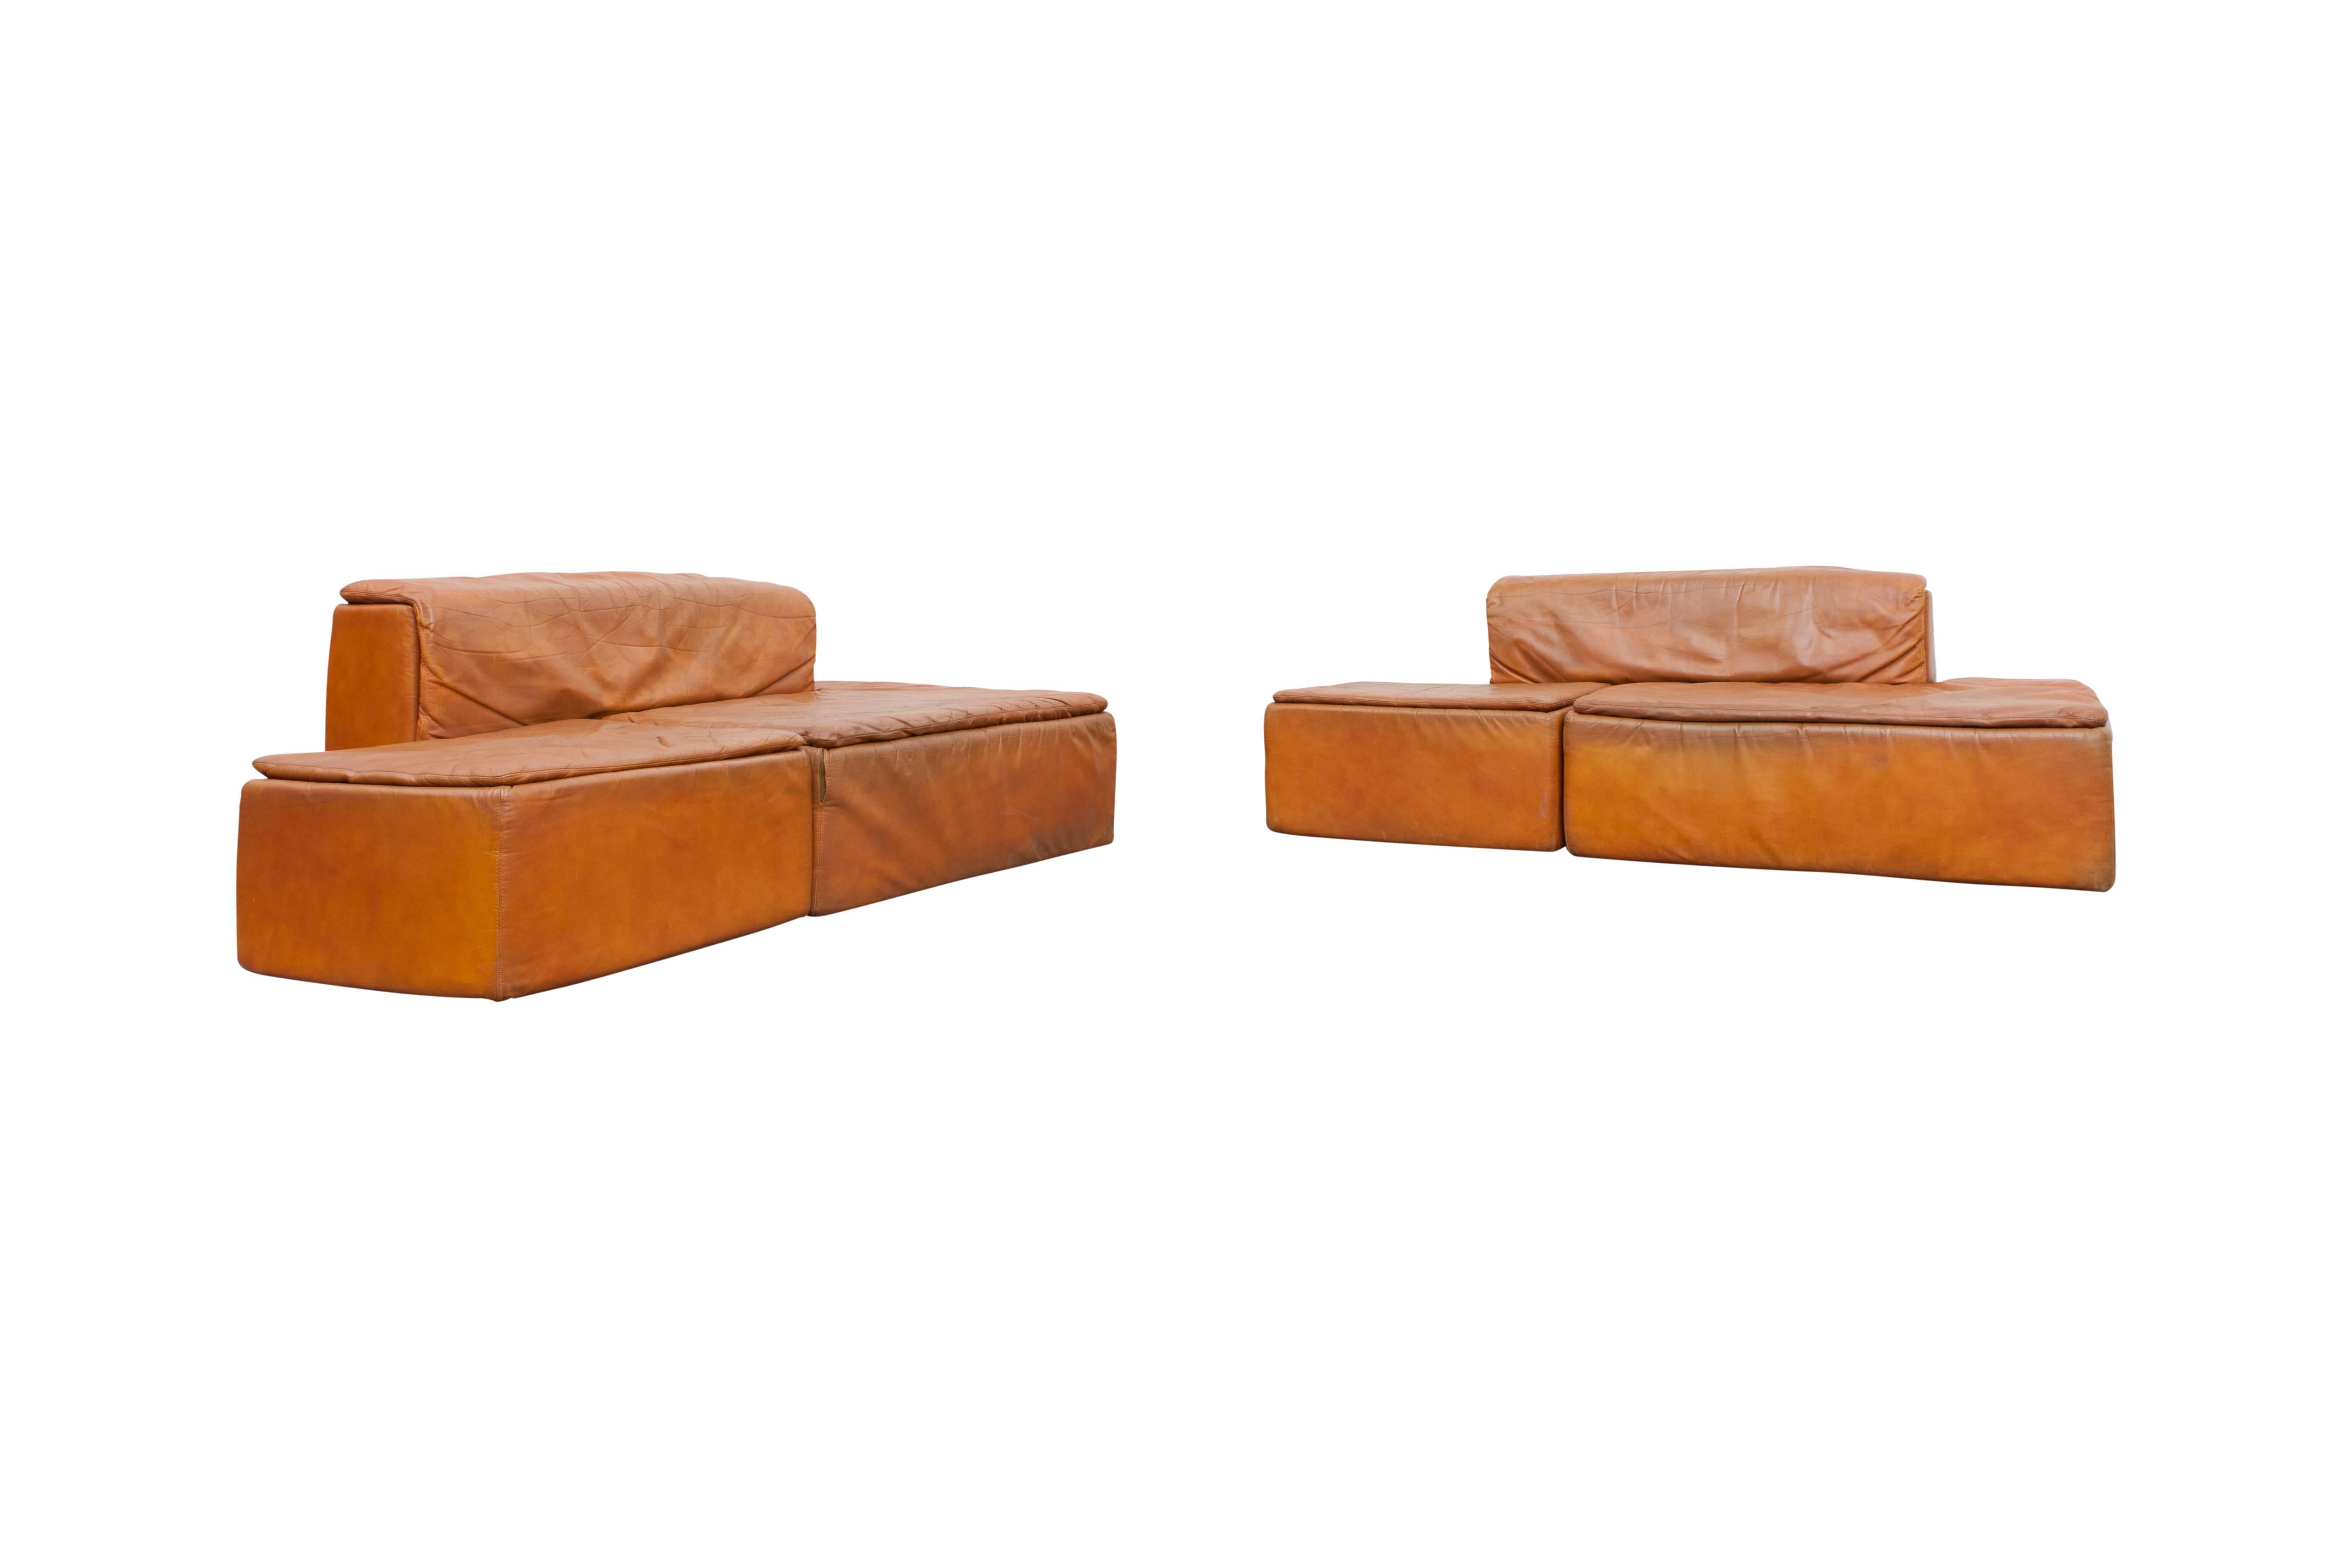 Modular Set of “Paione” Leather Sofa’s by Claudio Salocchi for Sormani 4